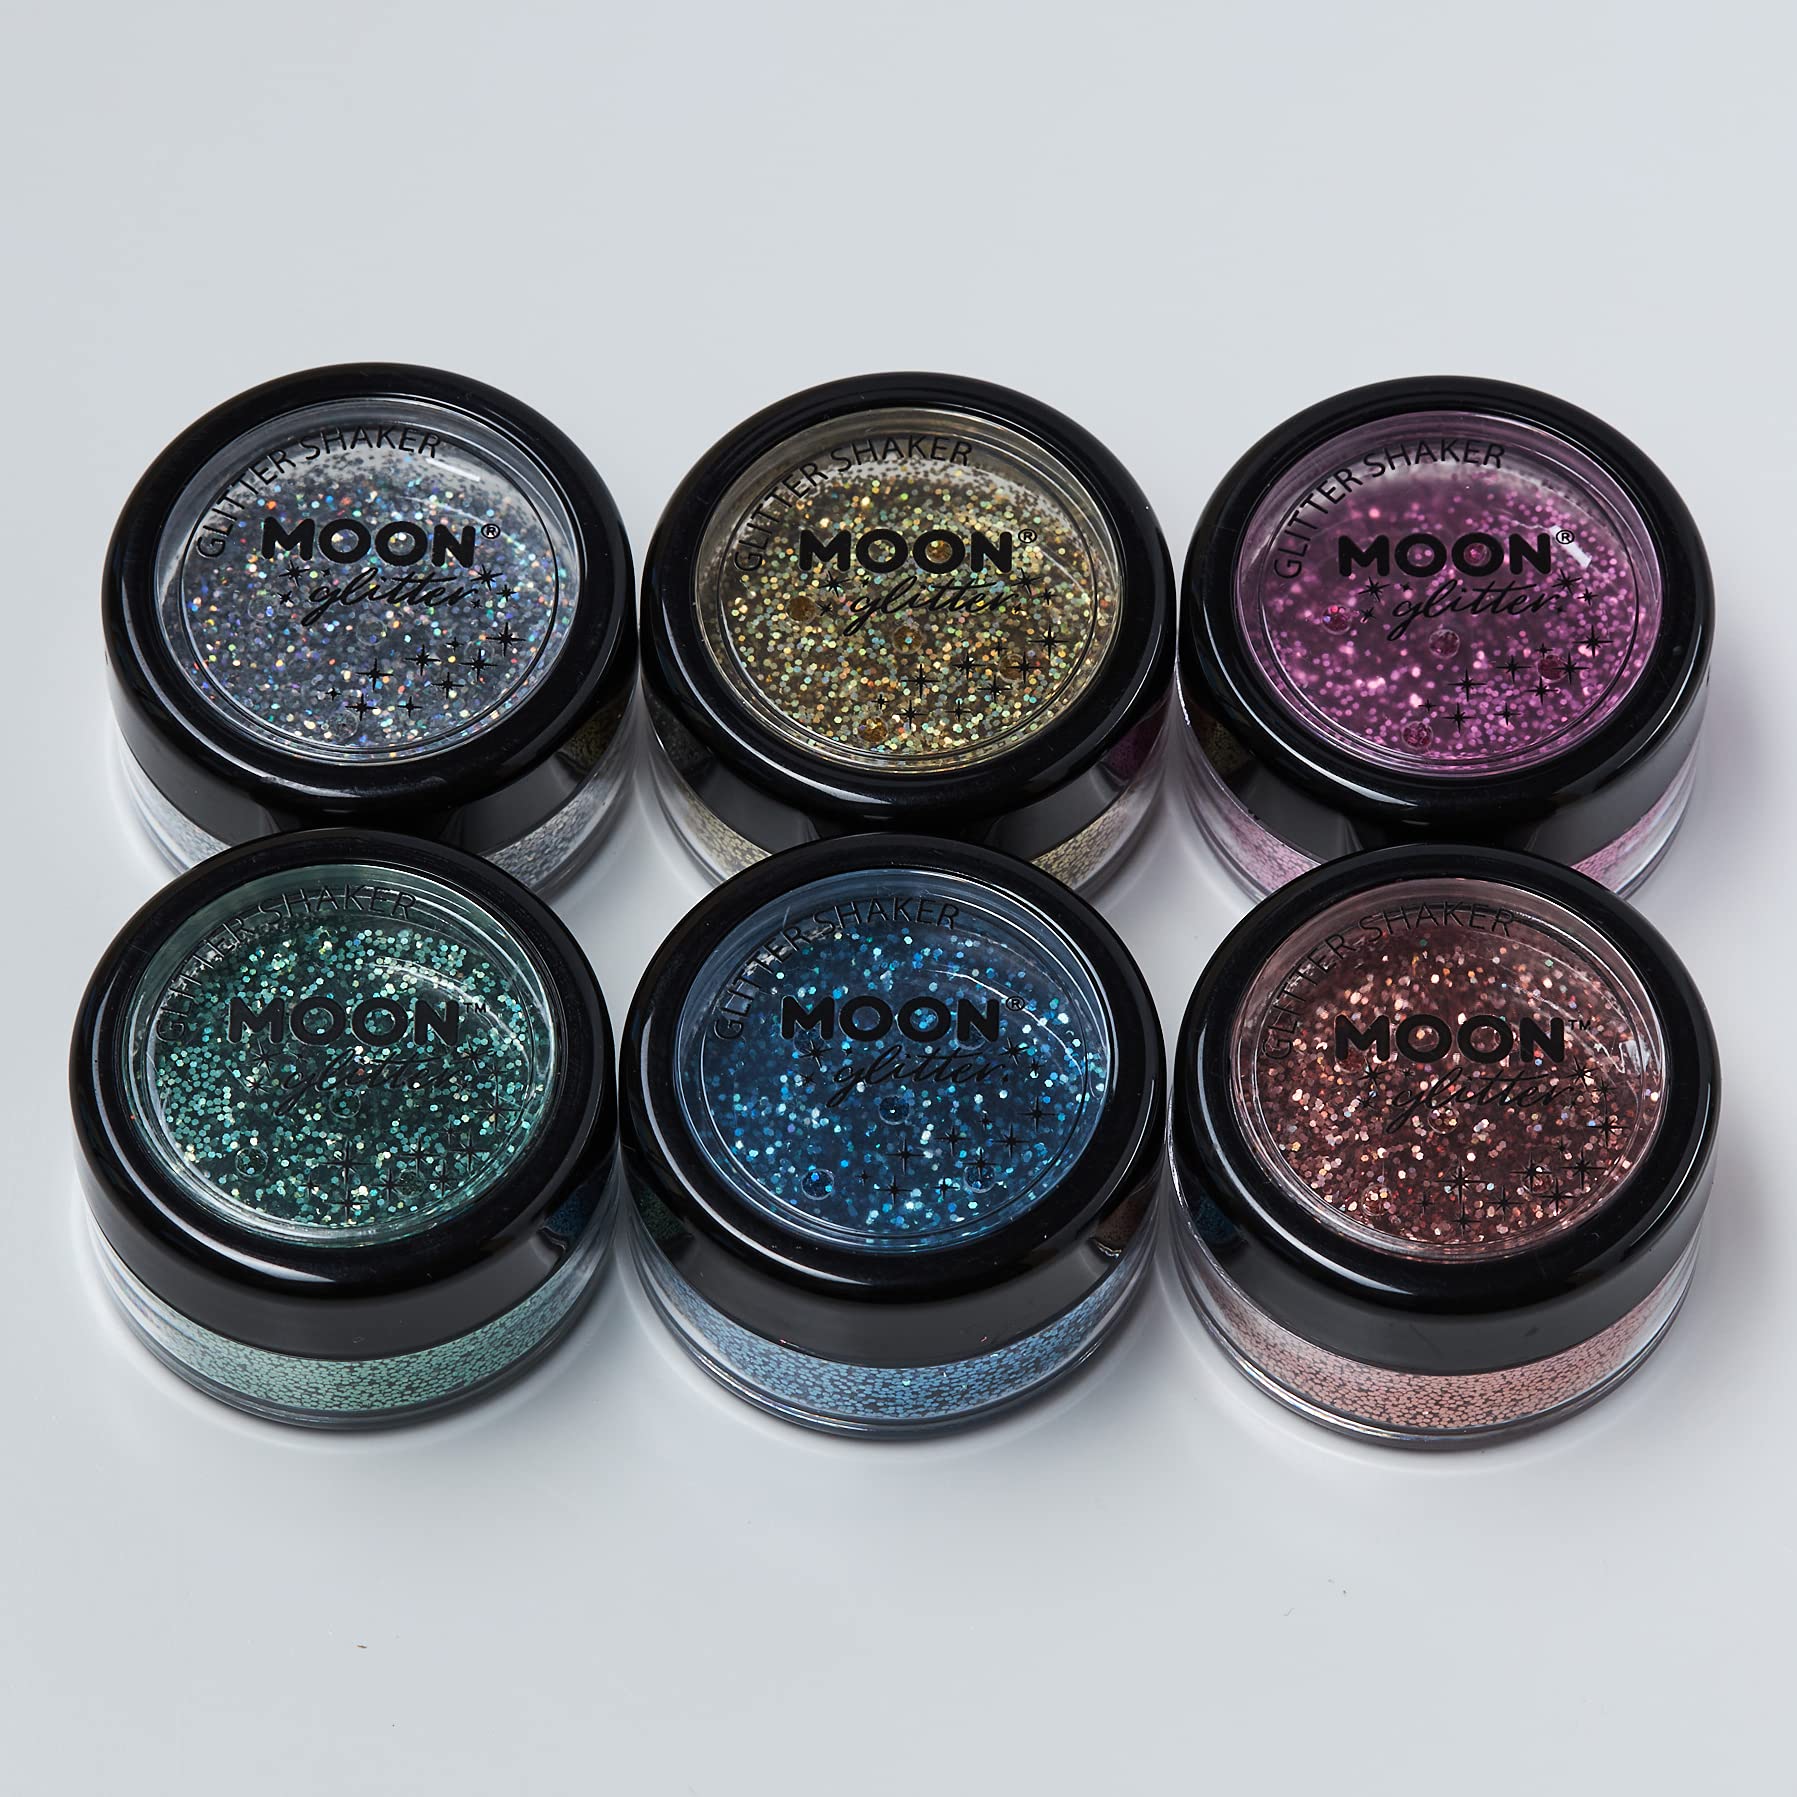 Moon Glitter Holographic Glitter Shakers 100% Cosmetic Glitter for Face, Body, Nails, Hair and Lips - 0.17oz - Rose Gold